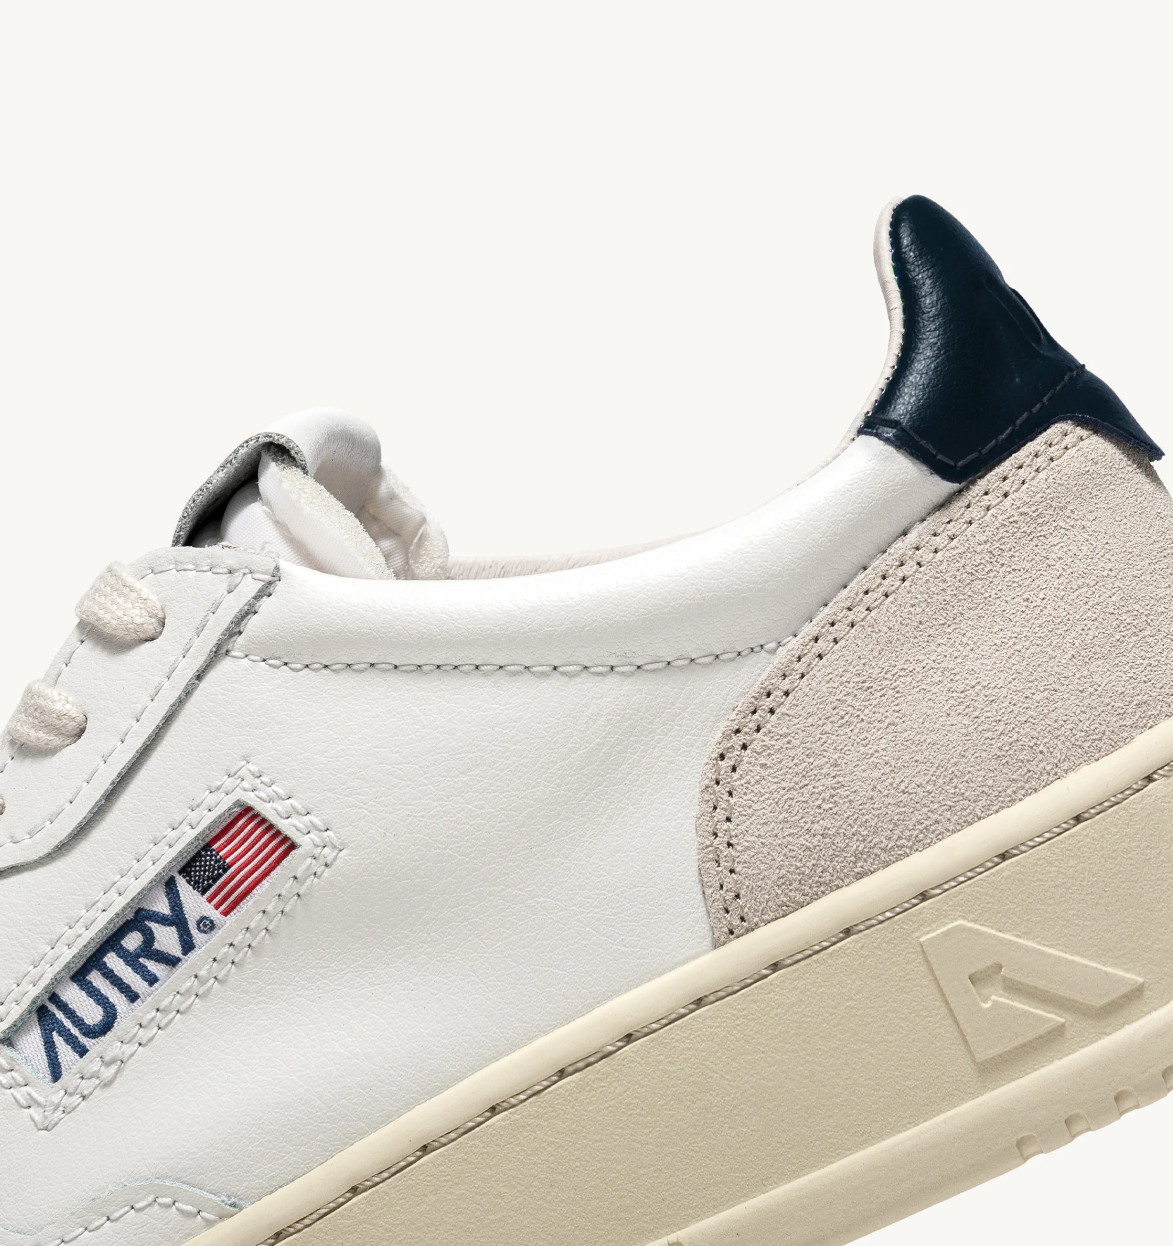 MEDALIST LOW LS21 SUEDE/LEATHER WHITE/BLACK